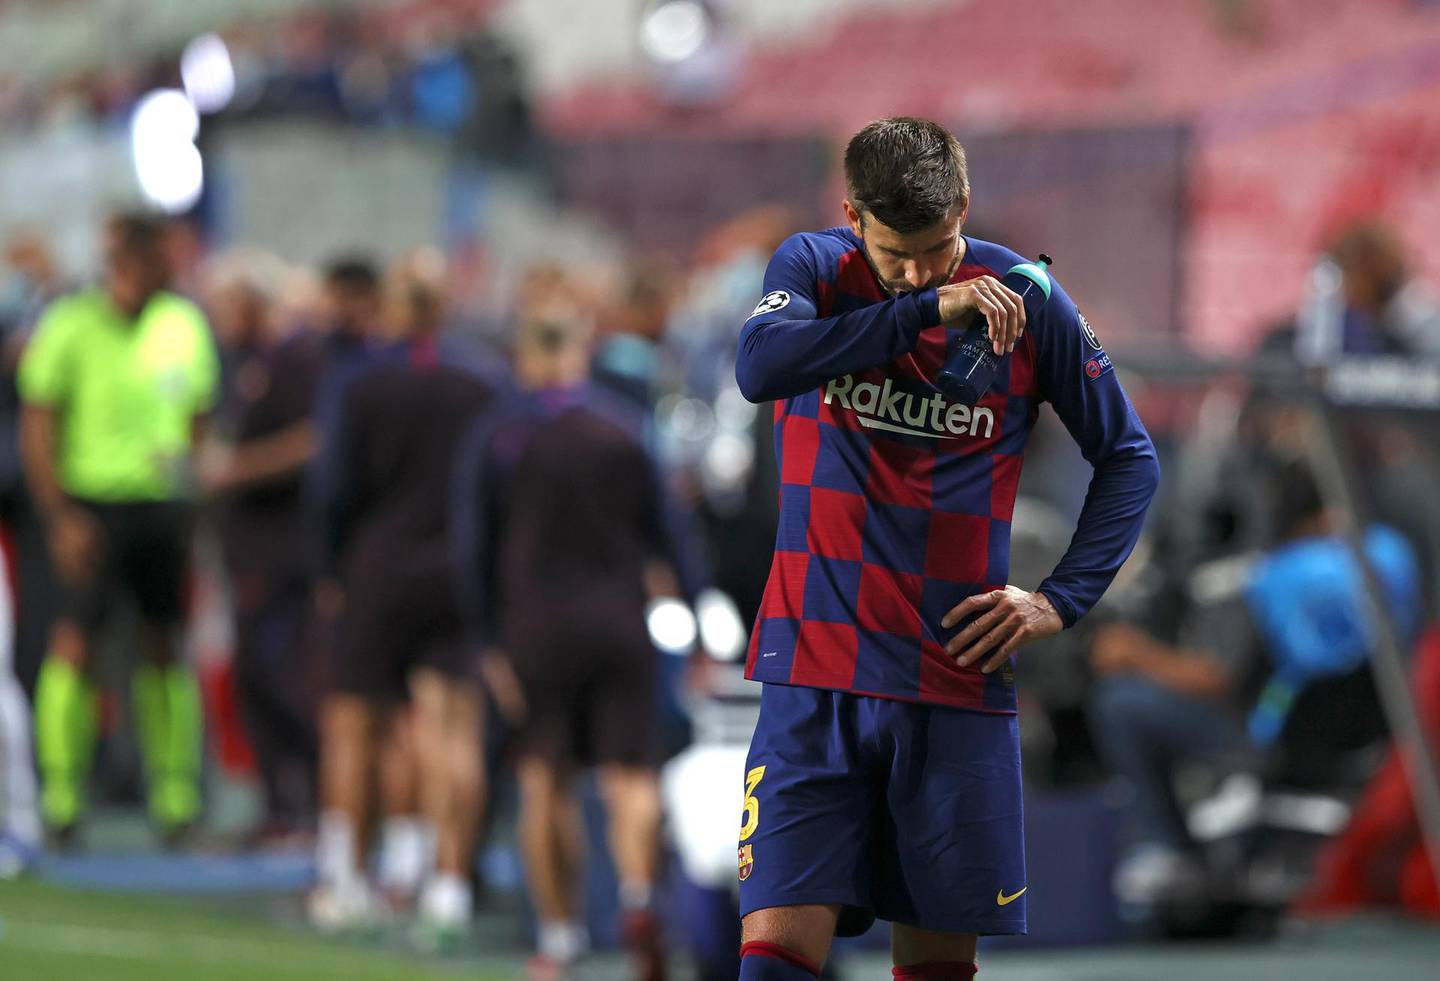 Barcelona's Gerard Pique reacts after the the Champions League quarterfinal soccer match between Barcelona and Bayern Munich in Lisbon, Portugal, Friday, Aug. 14, 2020. Bayern won the match 8-2. (Rafael Marchante/Pool via AP)